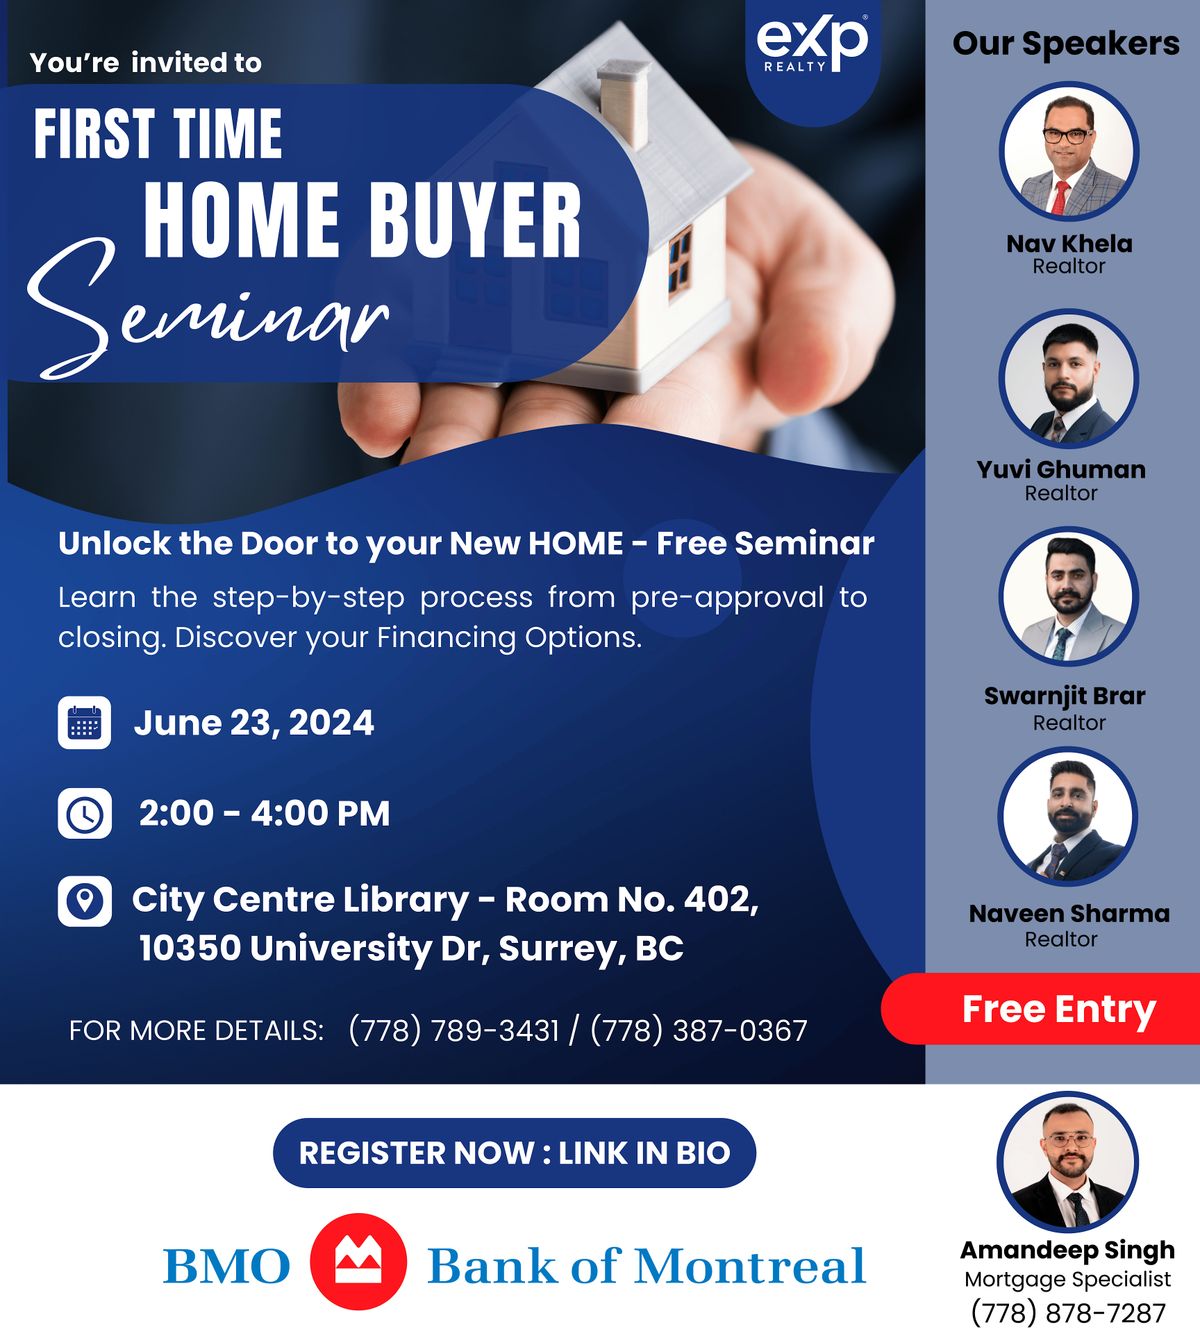 FIRST-TIME HOME BUYER (FREE SEMINAR)